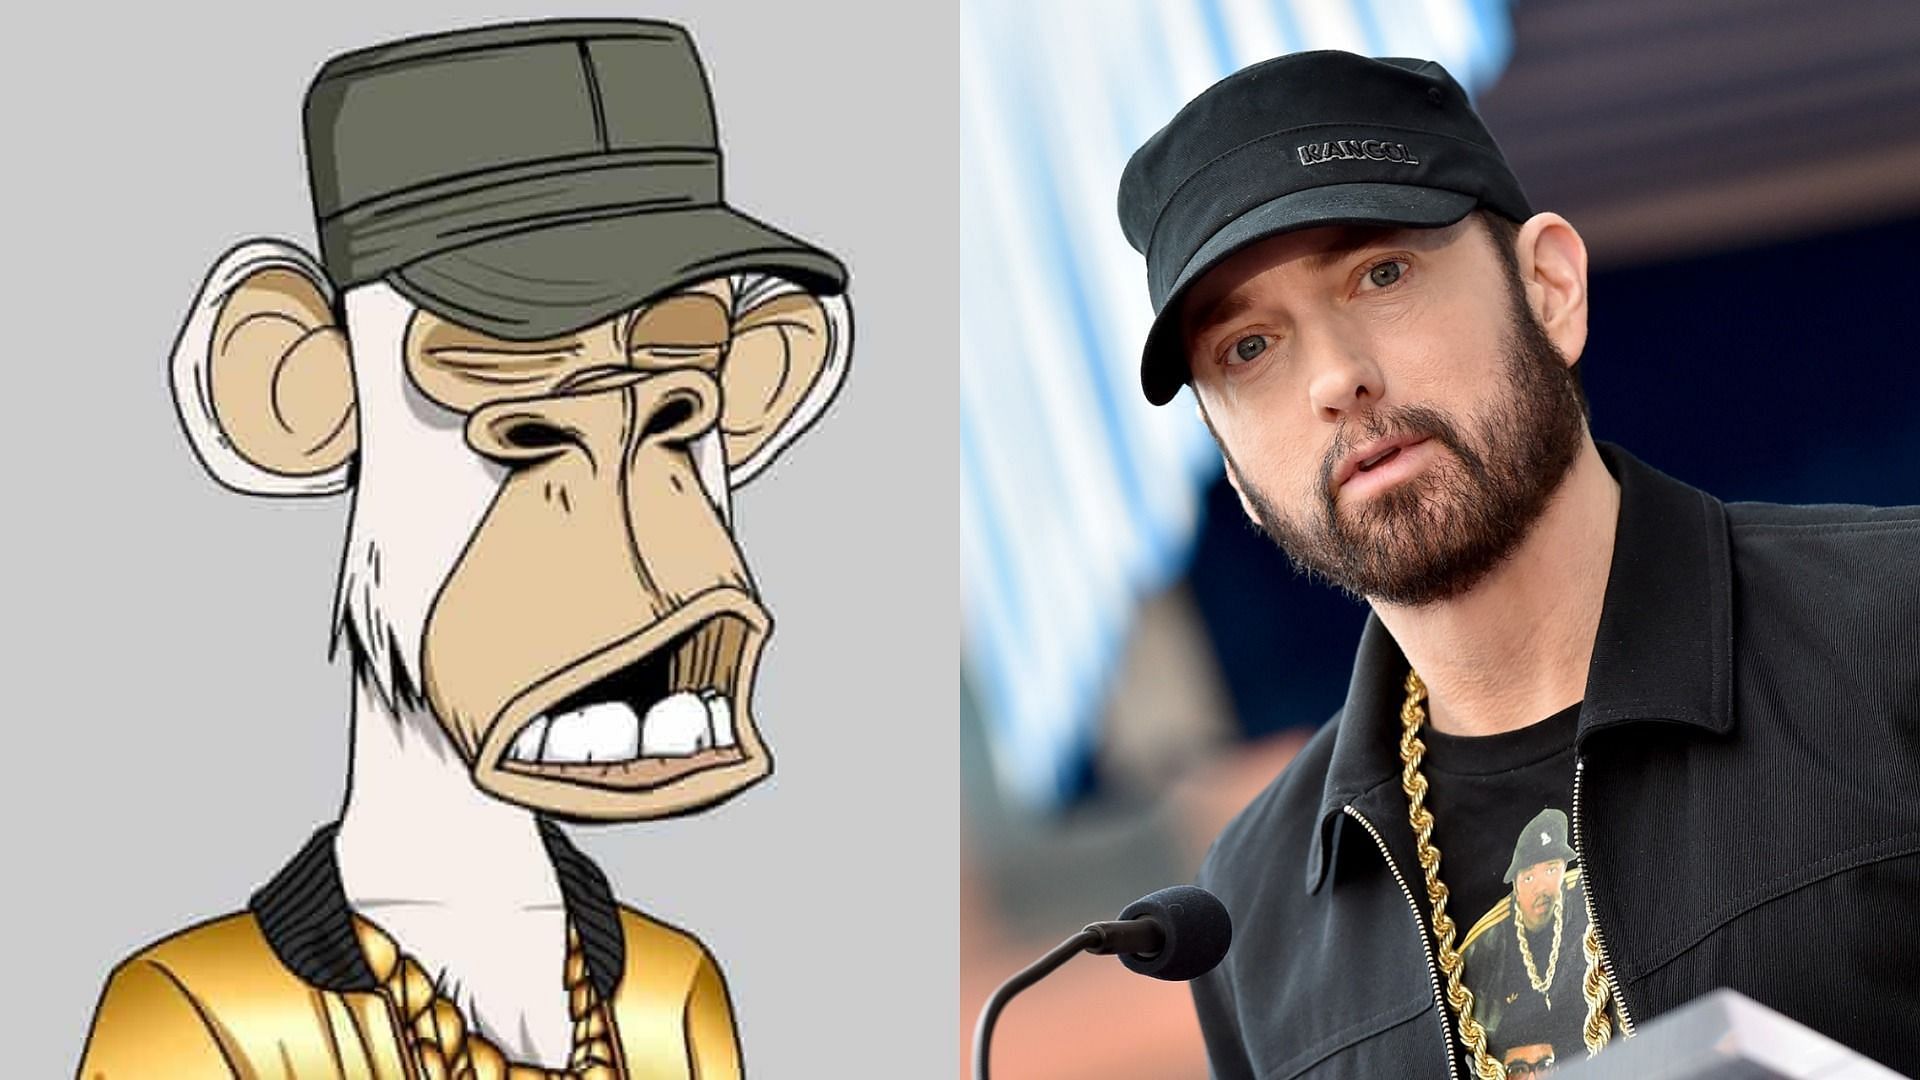 How much is a Bored Ape NFT? Eminem spends $450,000 on NFT that looks ...